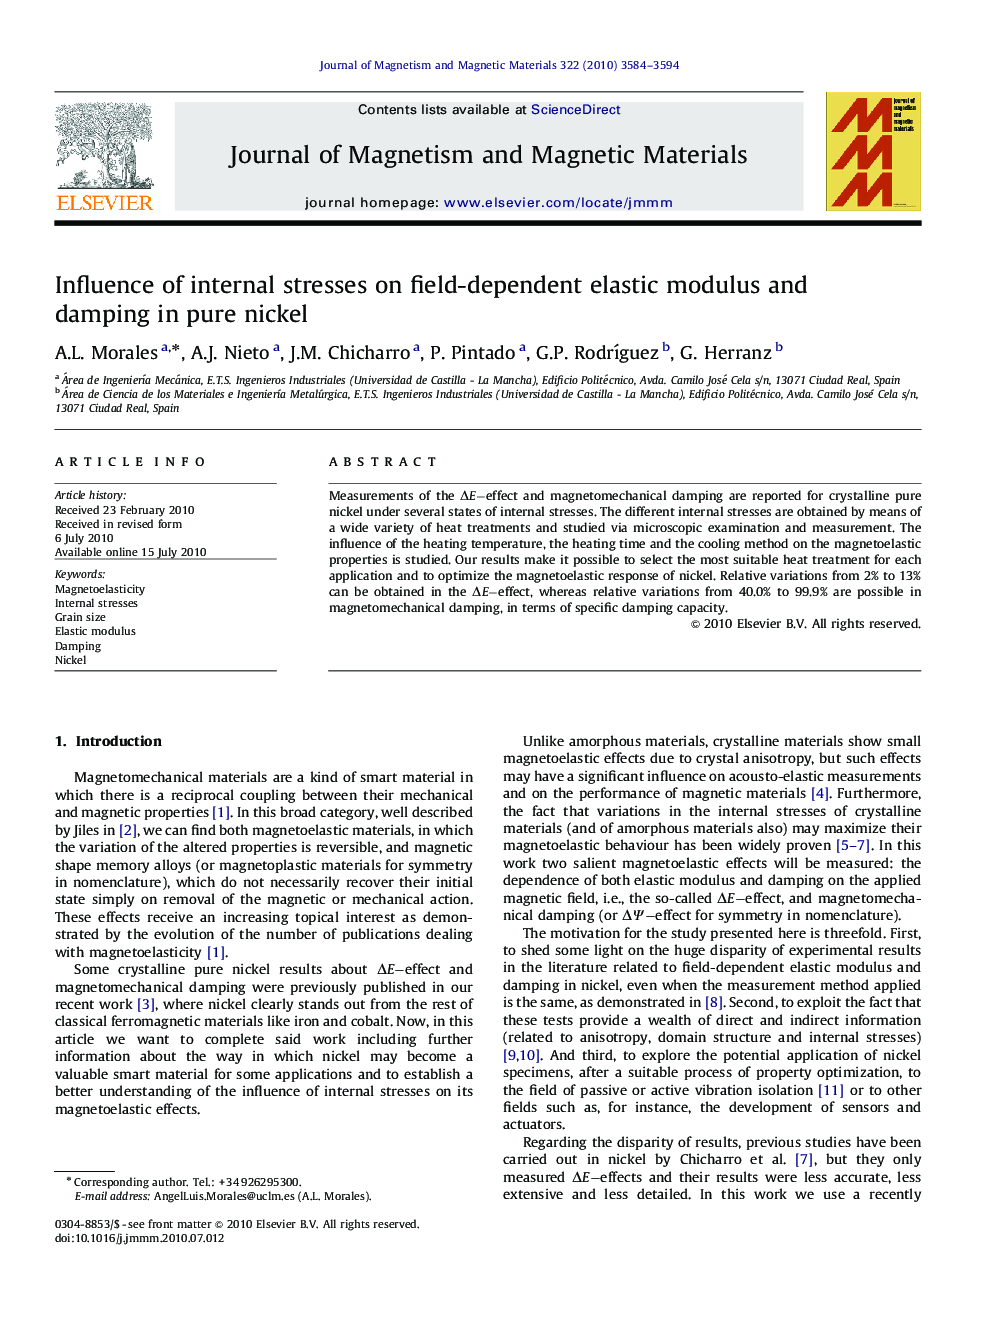 Influence of internal stresses on field-dependent elastic modulus and damping in pure nickel